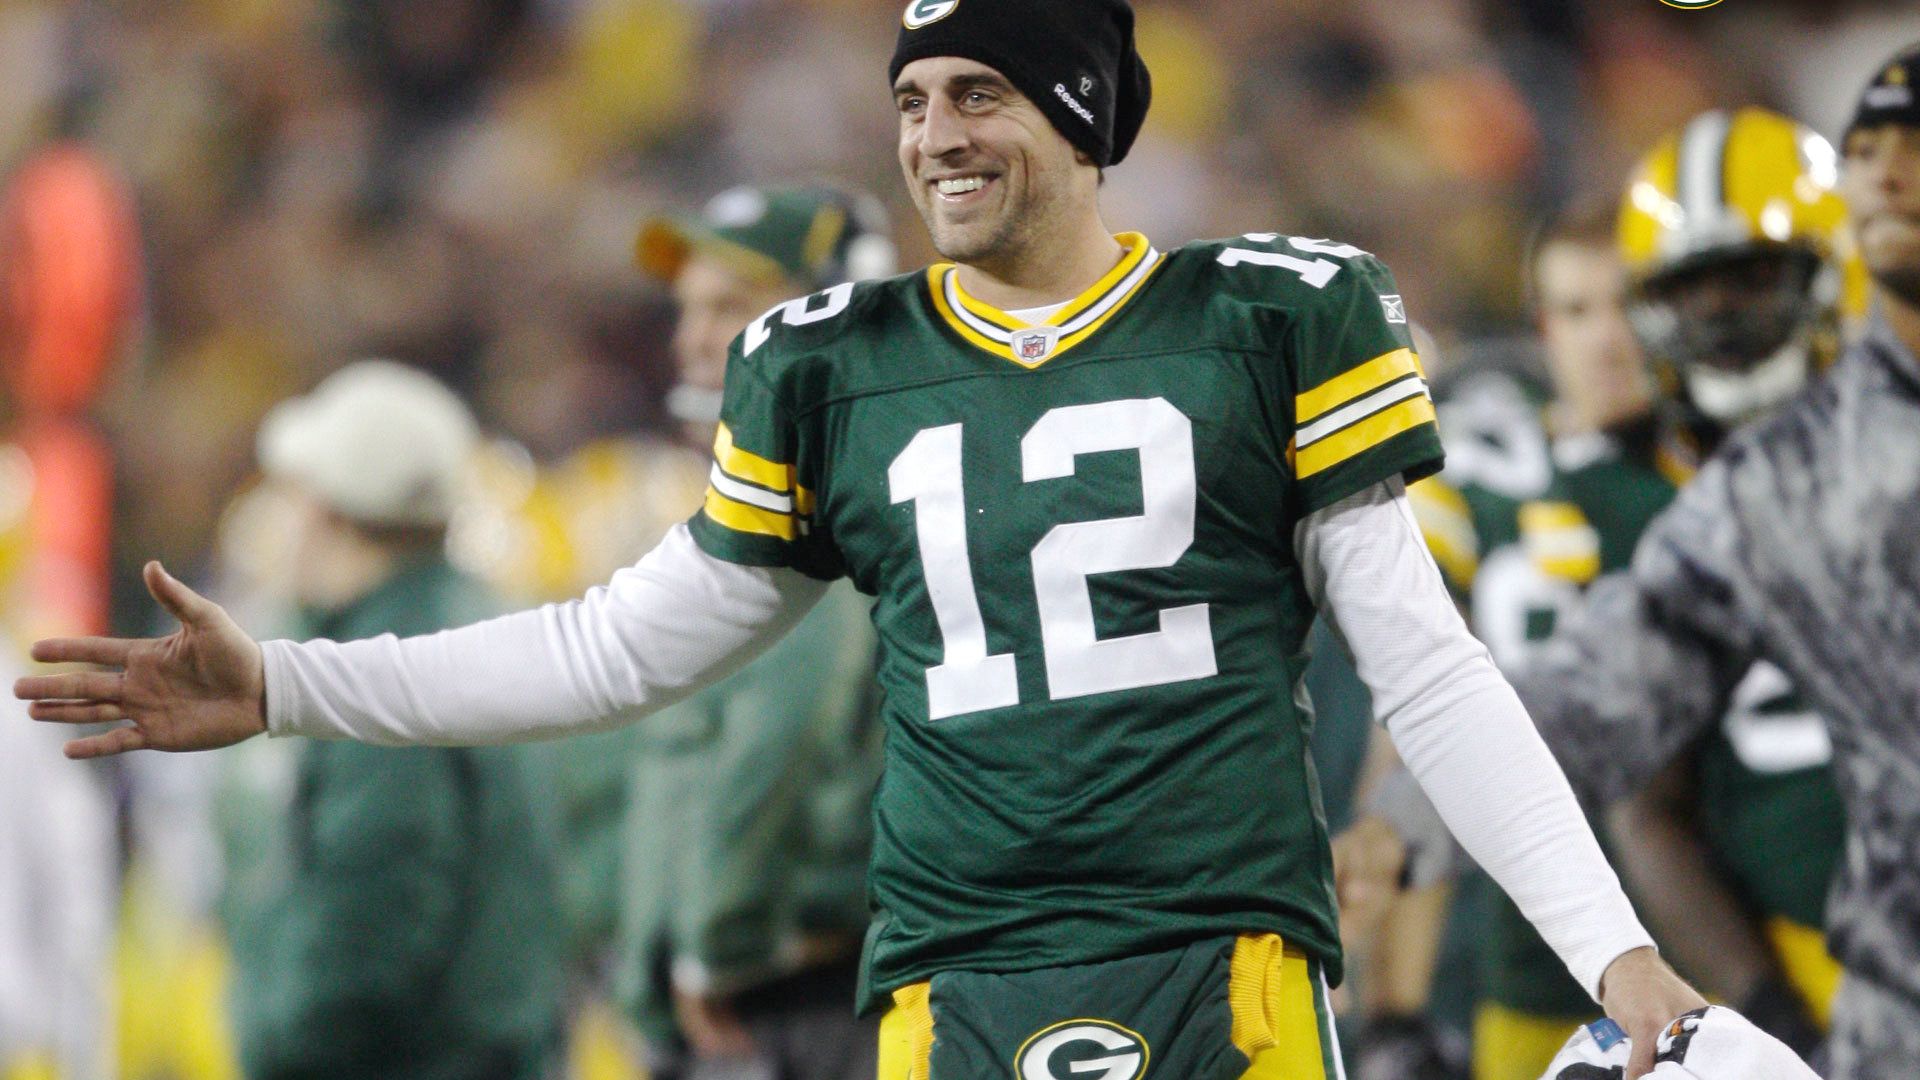 Aaron Rodgers Football Backgrounds 6221 1920x1080 px